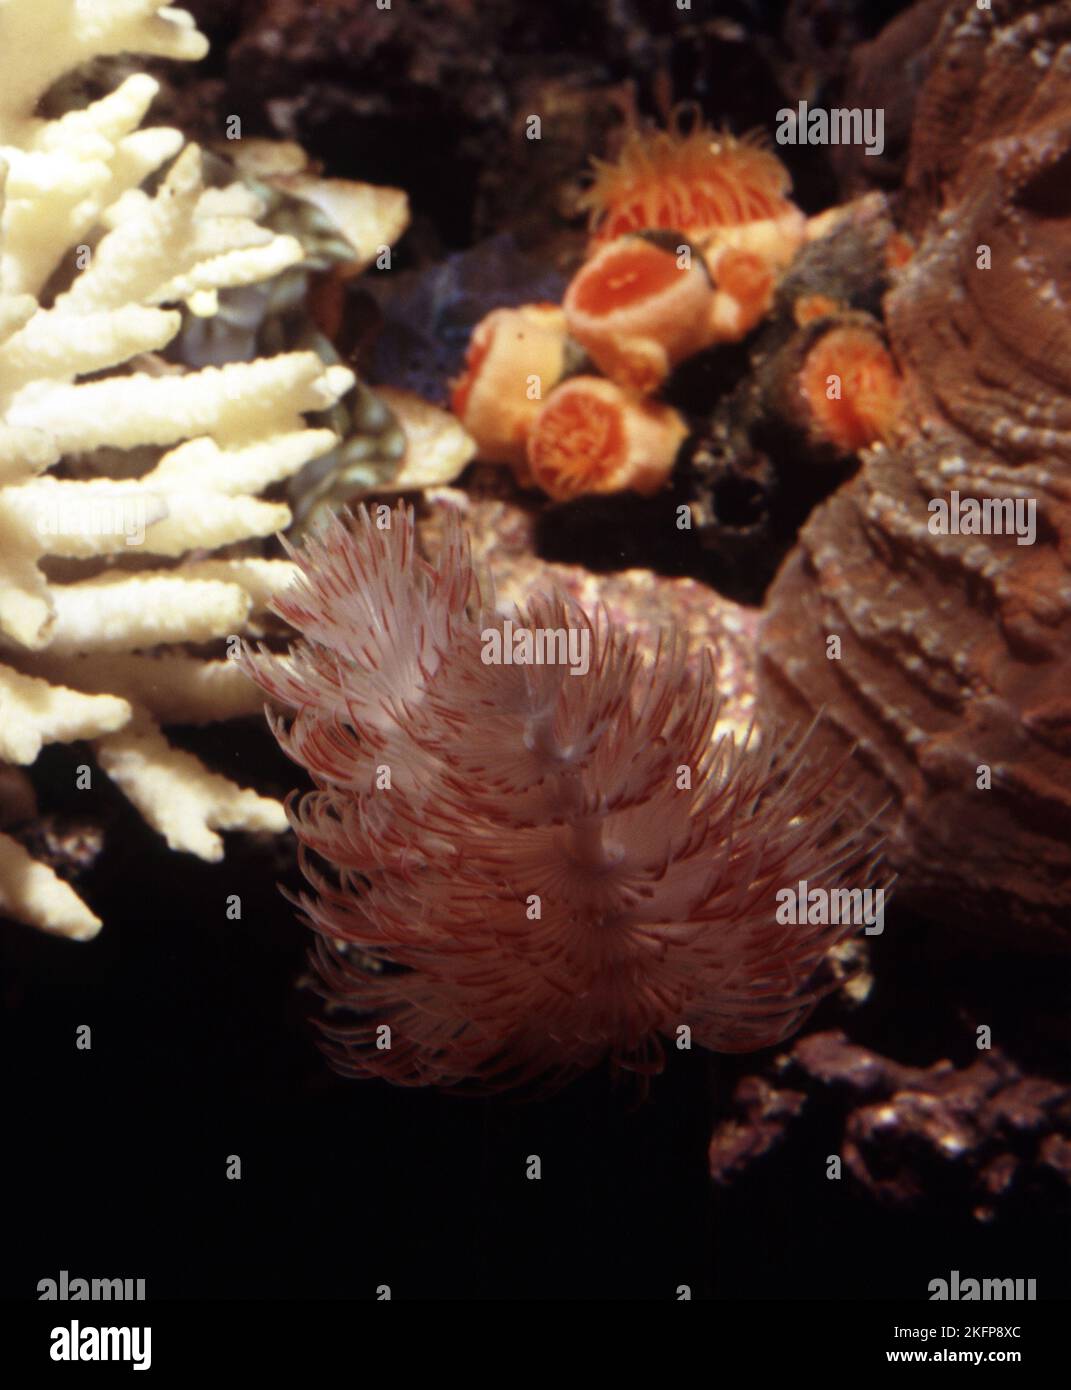 Protula bispiralis, commonly known as the red fanworm or as a mopworm, is a species of marine polychaete worm in the family Serpulidae Stock Photo